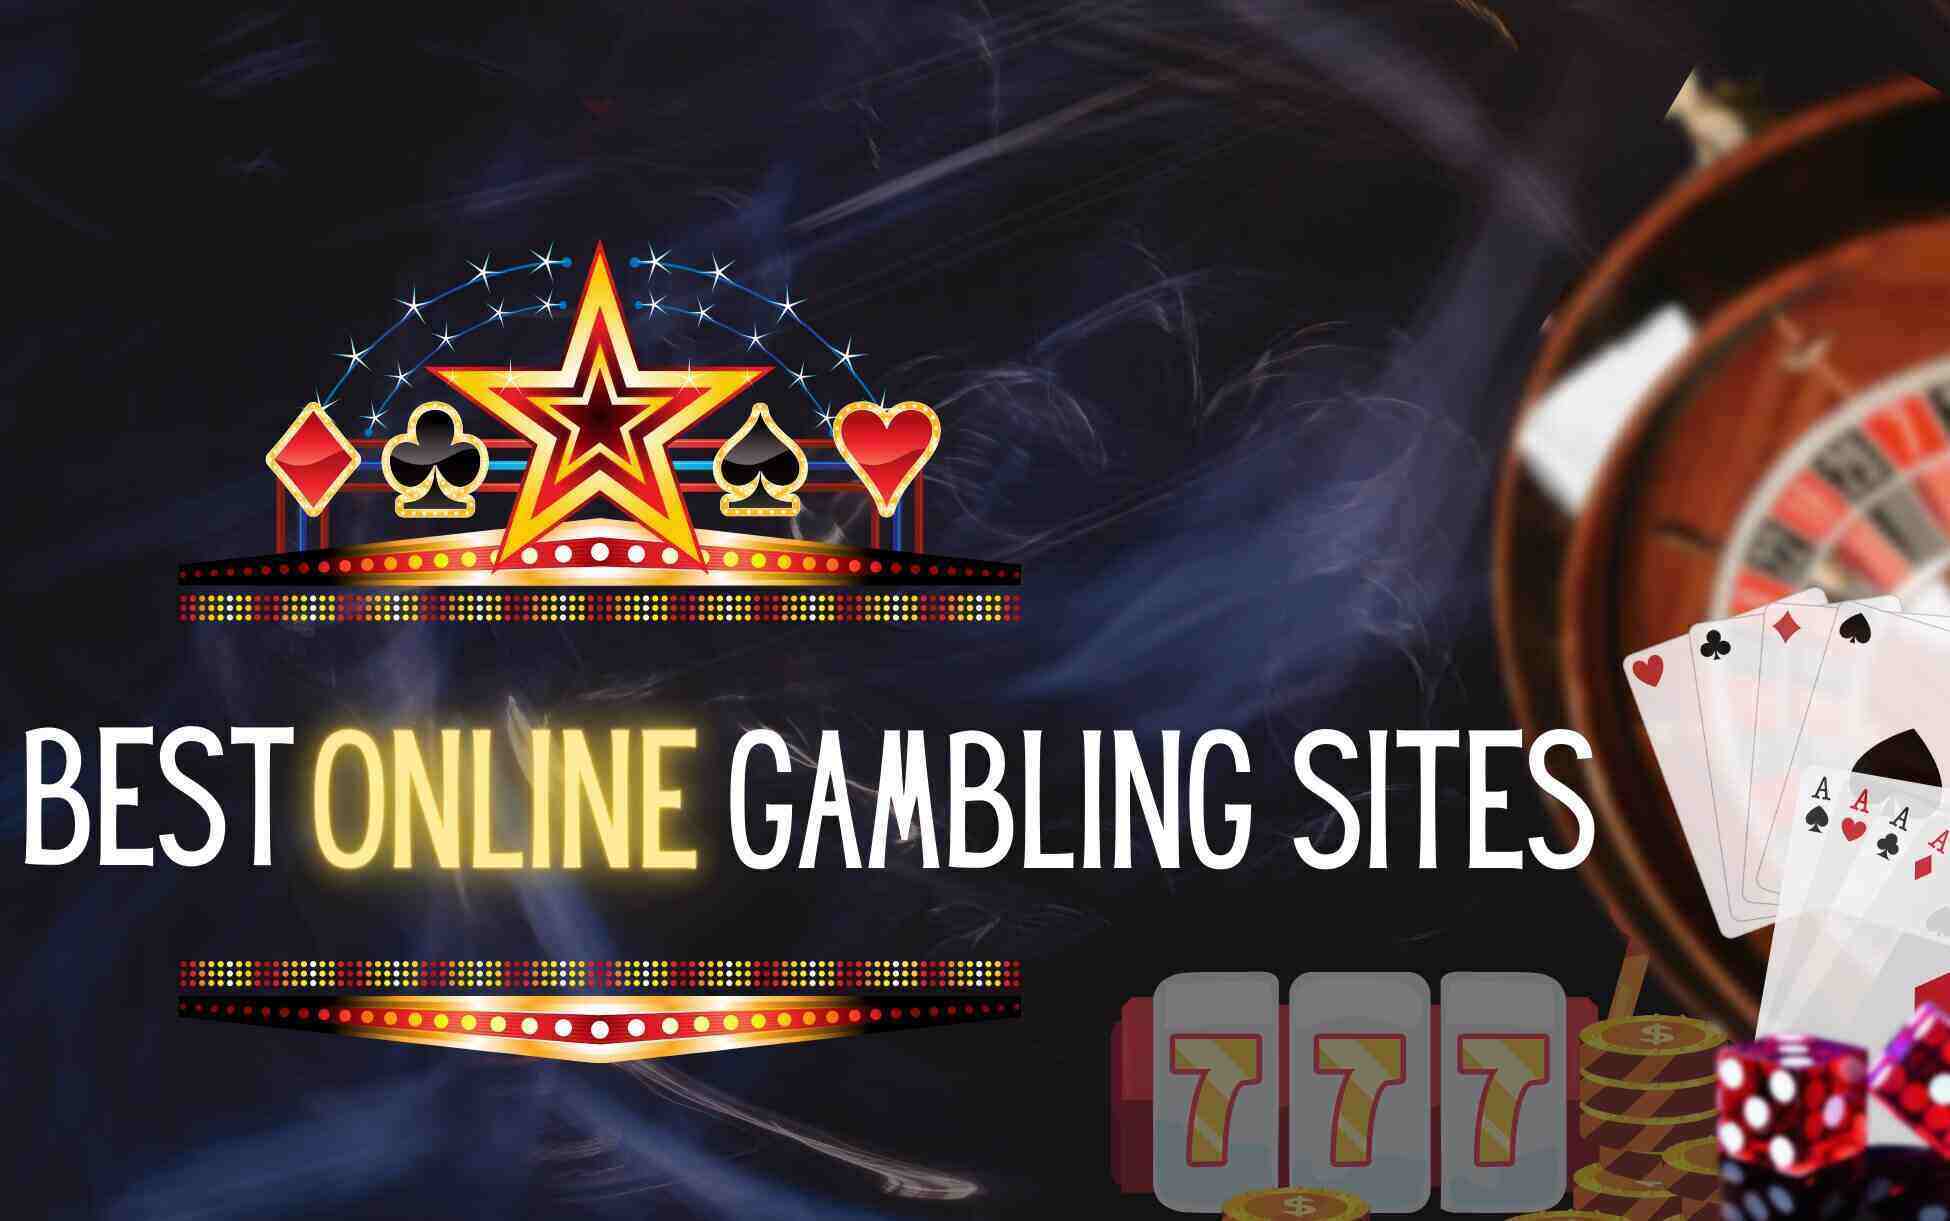 How To Take The Headache Out Of what is best online casino